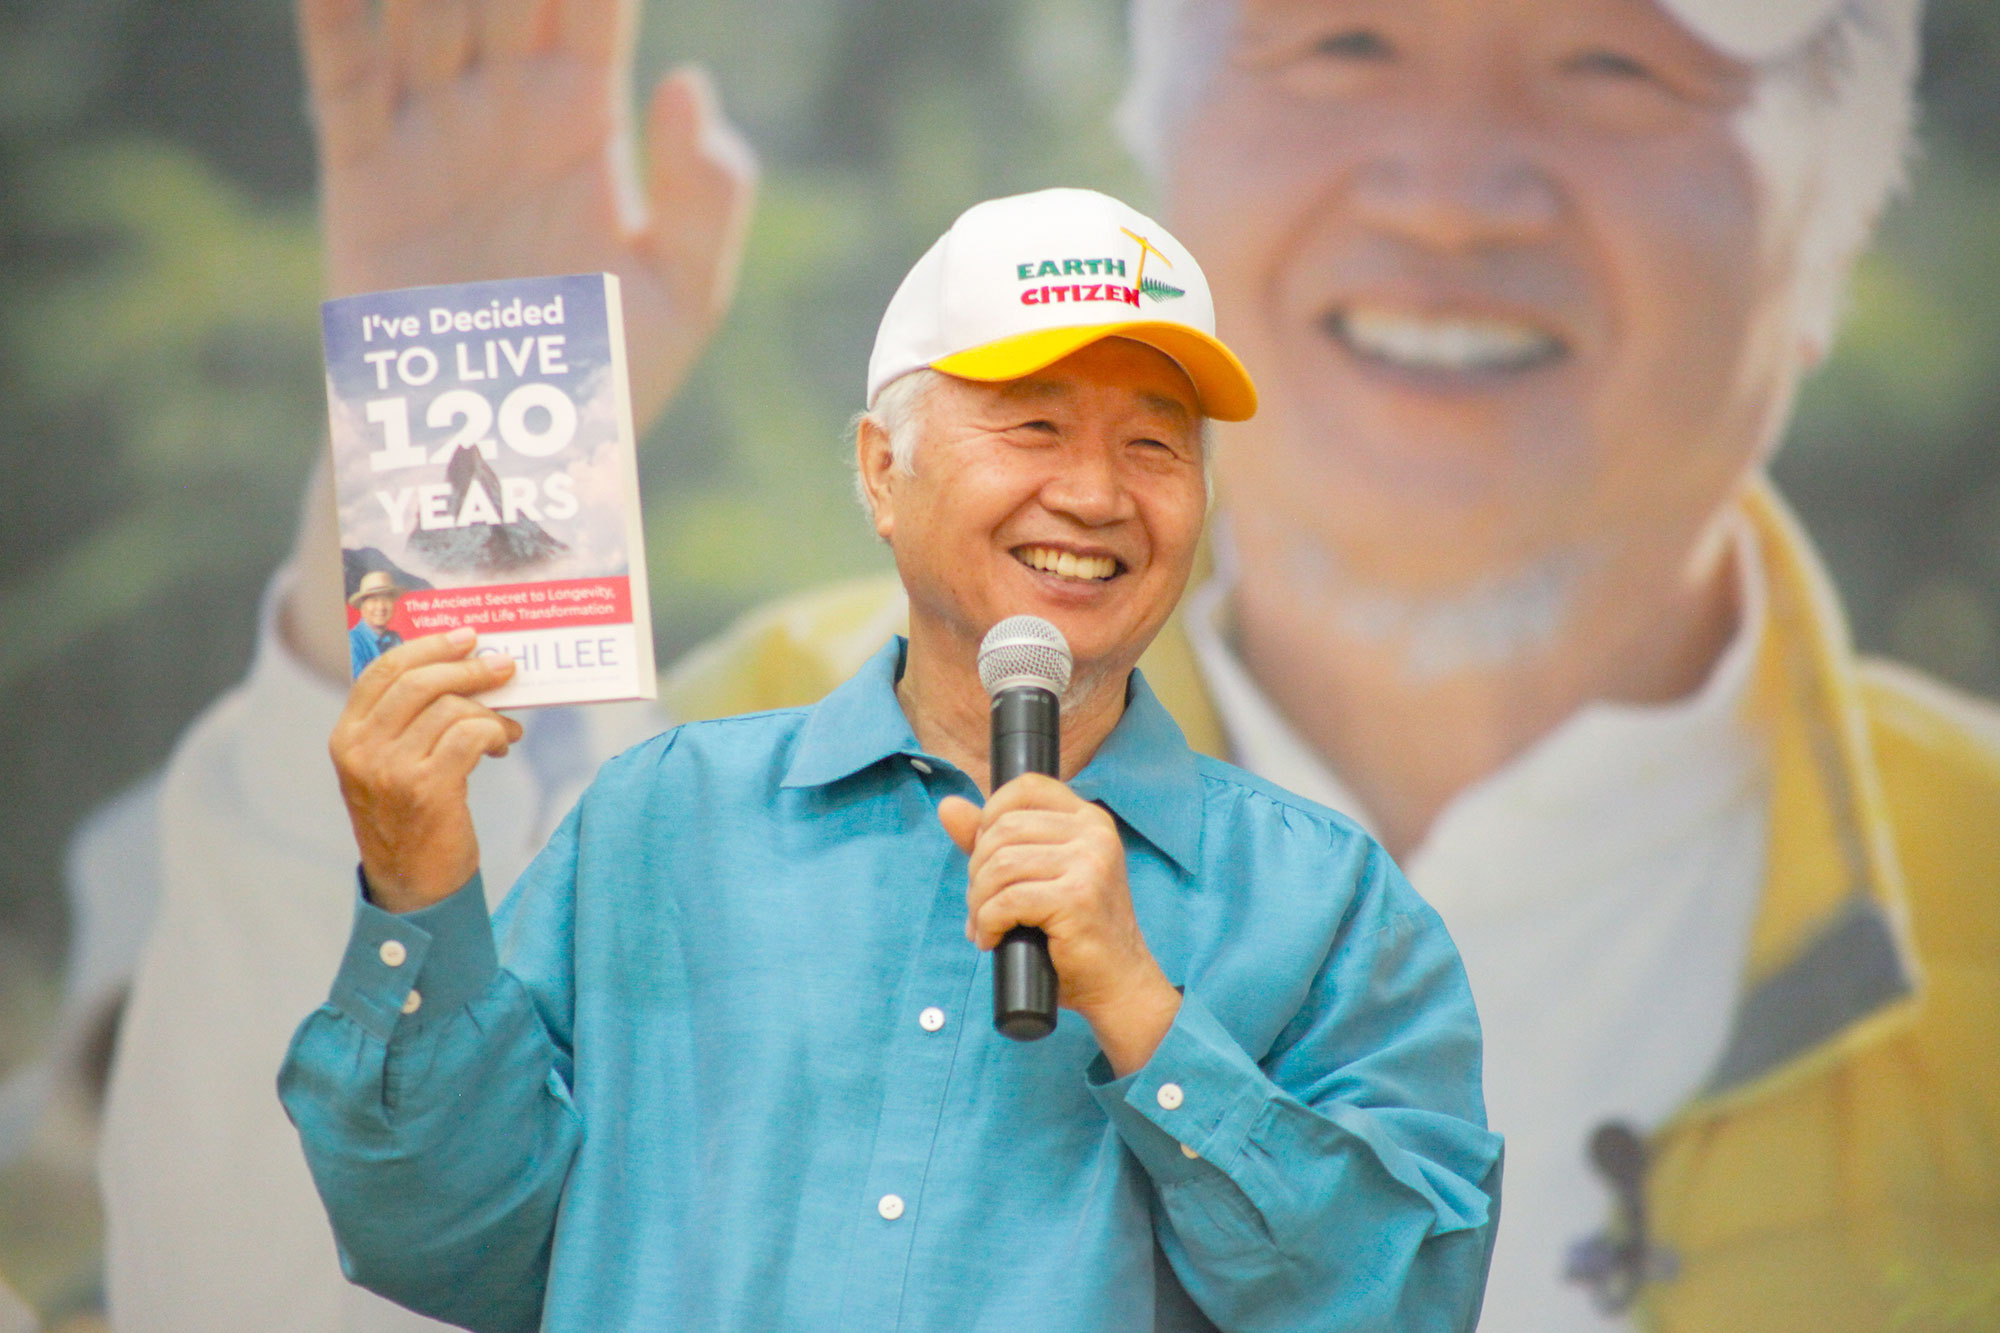 Ilchi Lee with his book, "I've Decided to Live 120 Years: The Ancient Secret to Longevity, Vitality, and Life Transformation"